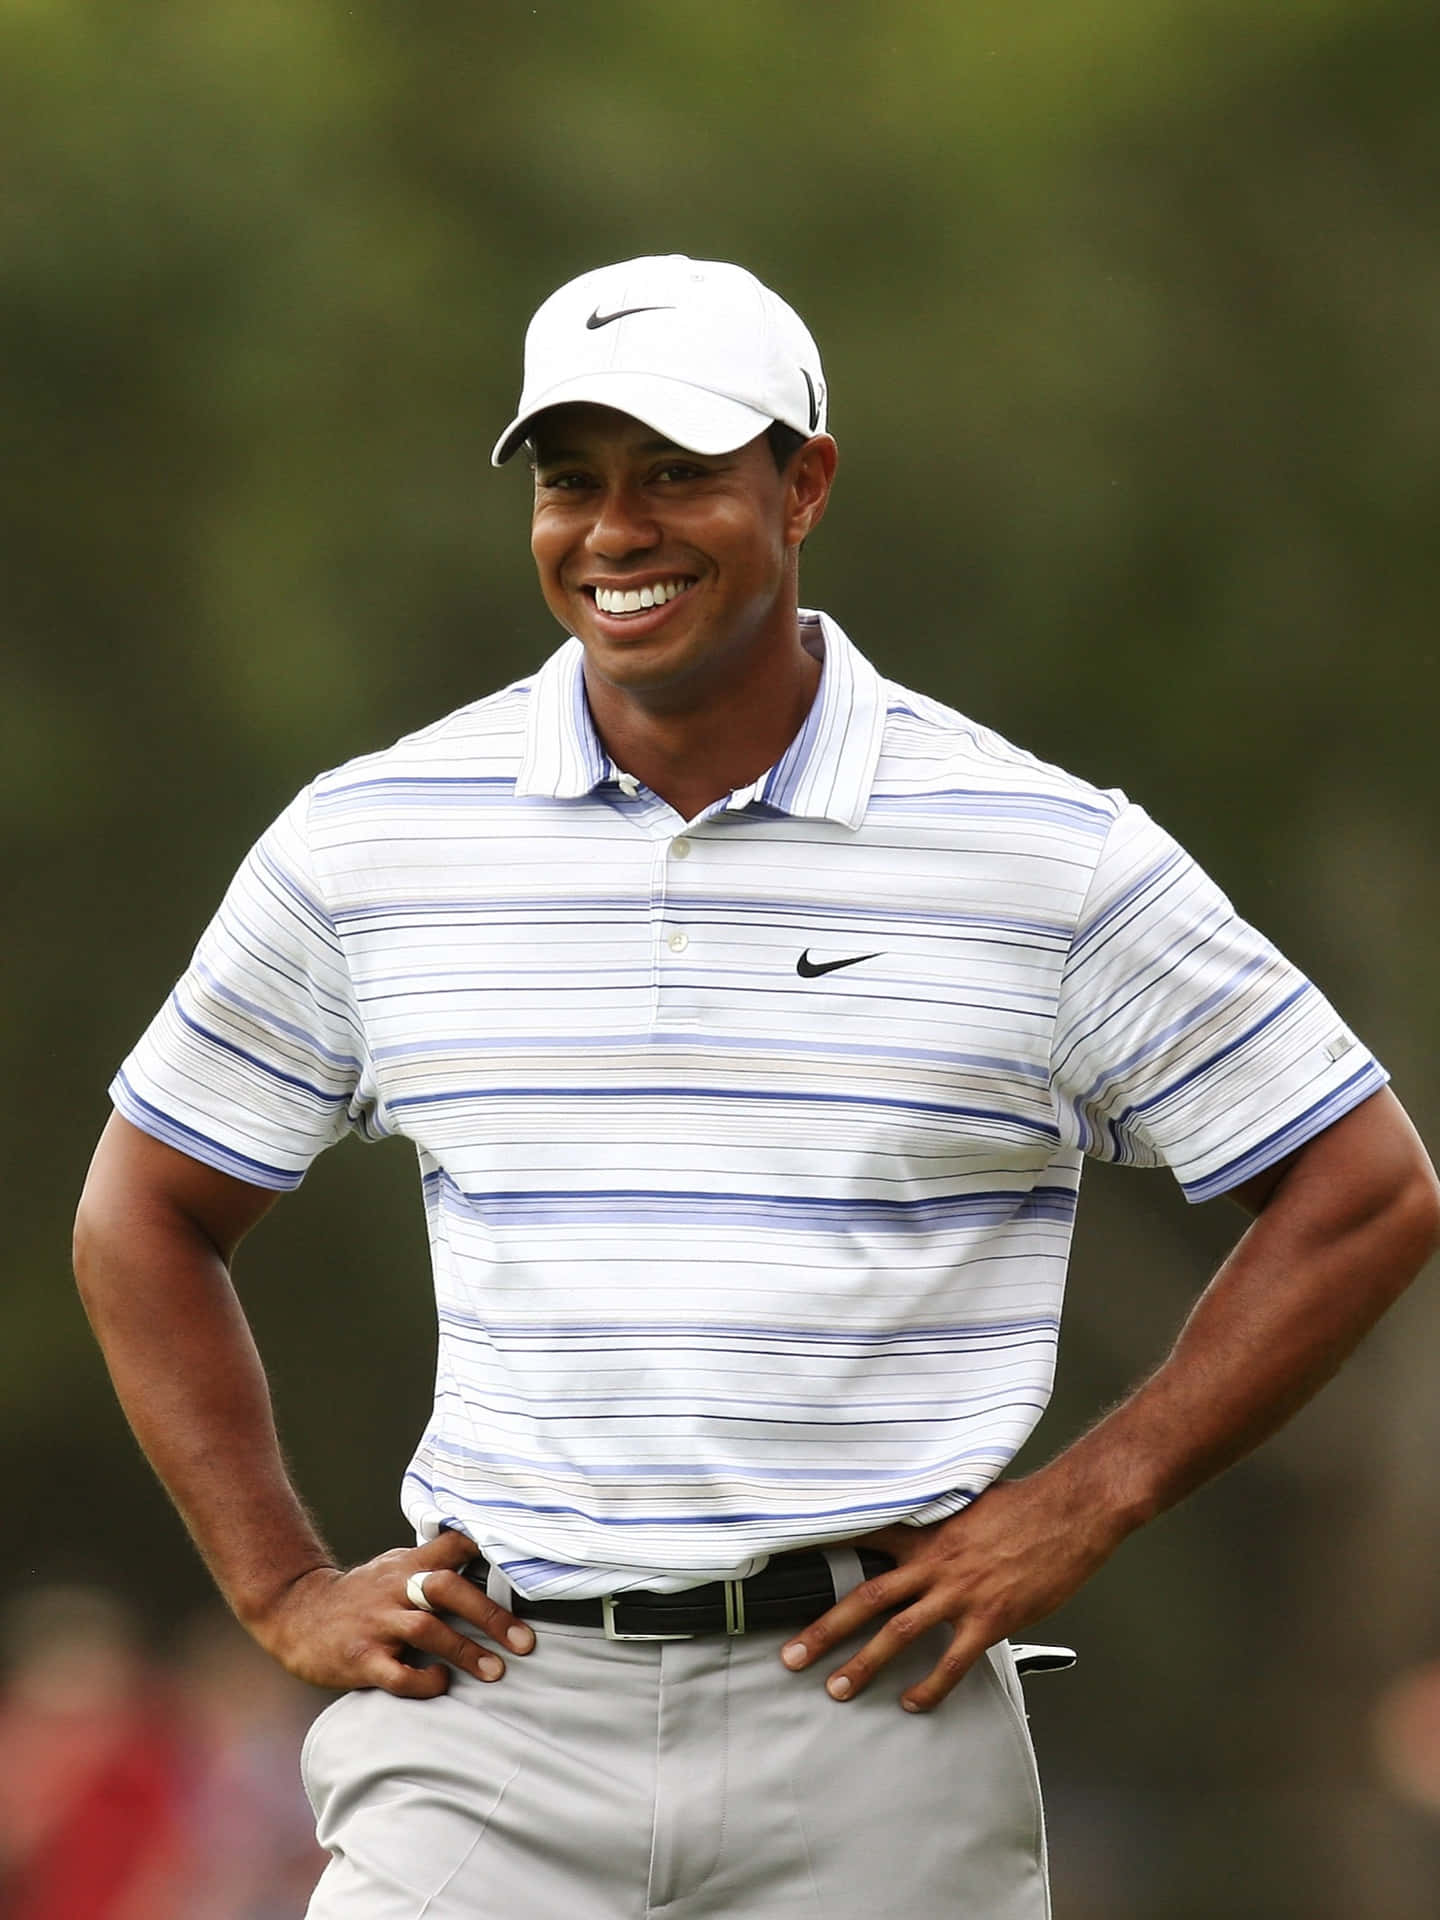 Smiling Tiger Woods Iphone Wallpaper